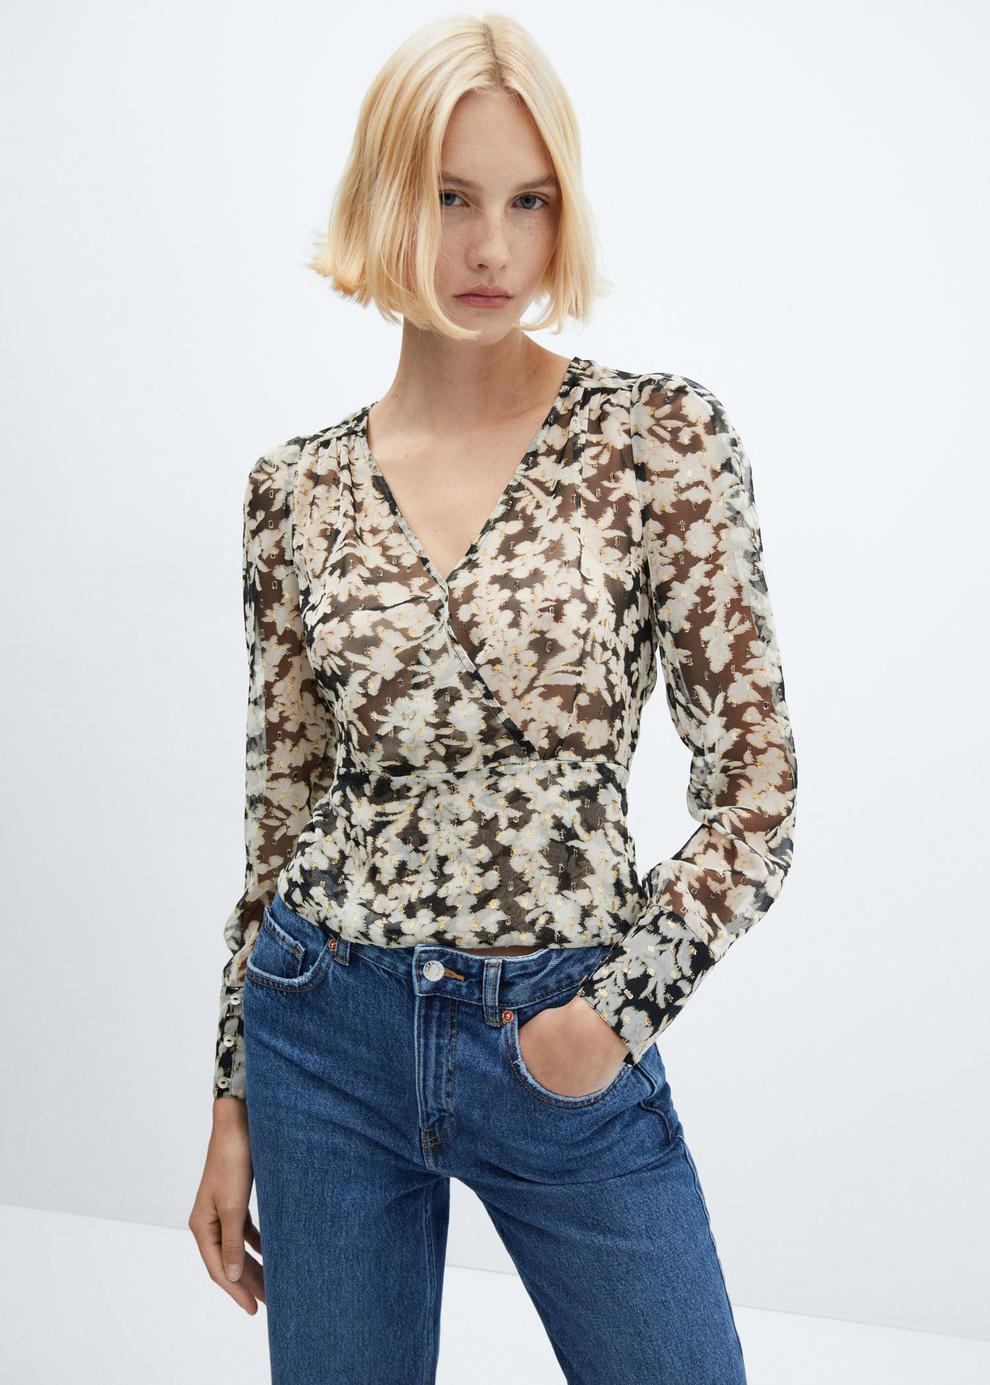 Floral print crossover blouse offers at £22.99 in MANGO